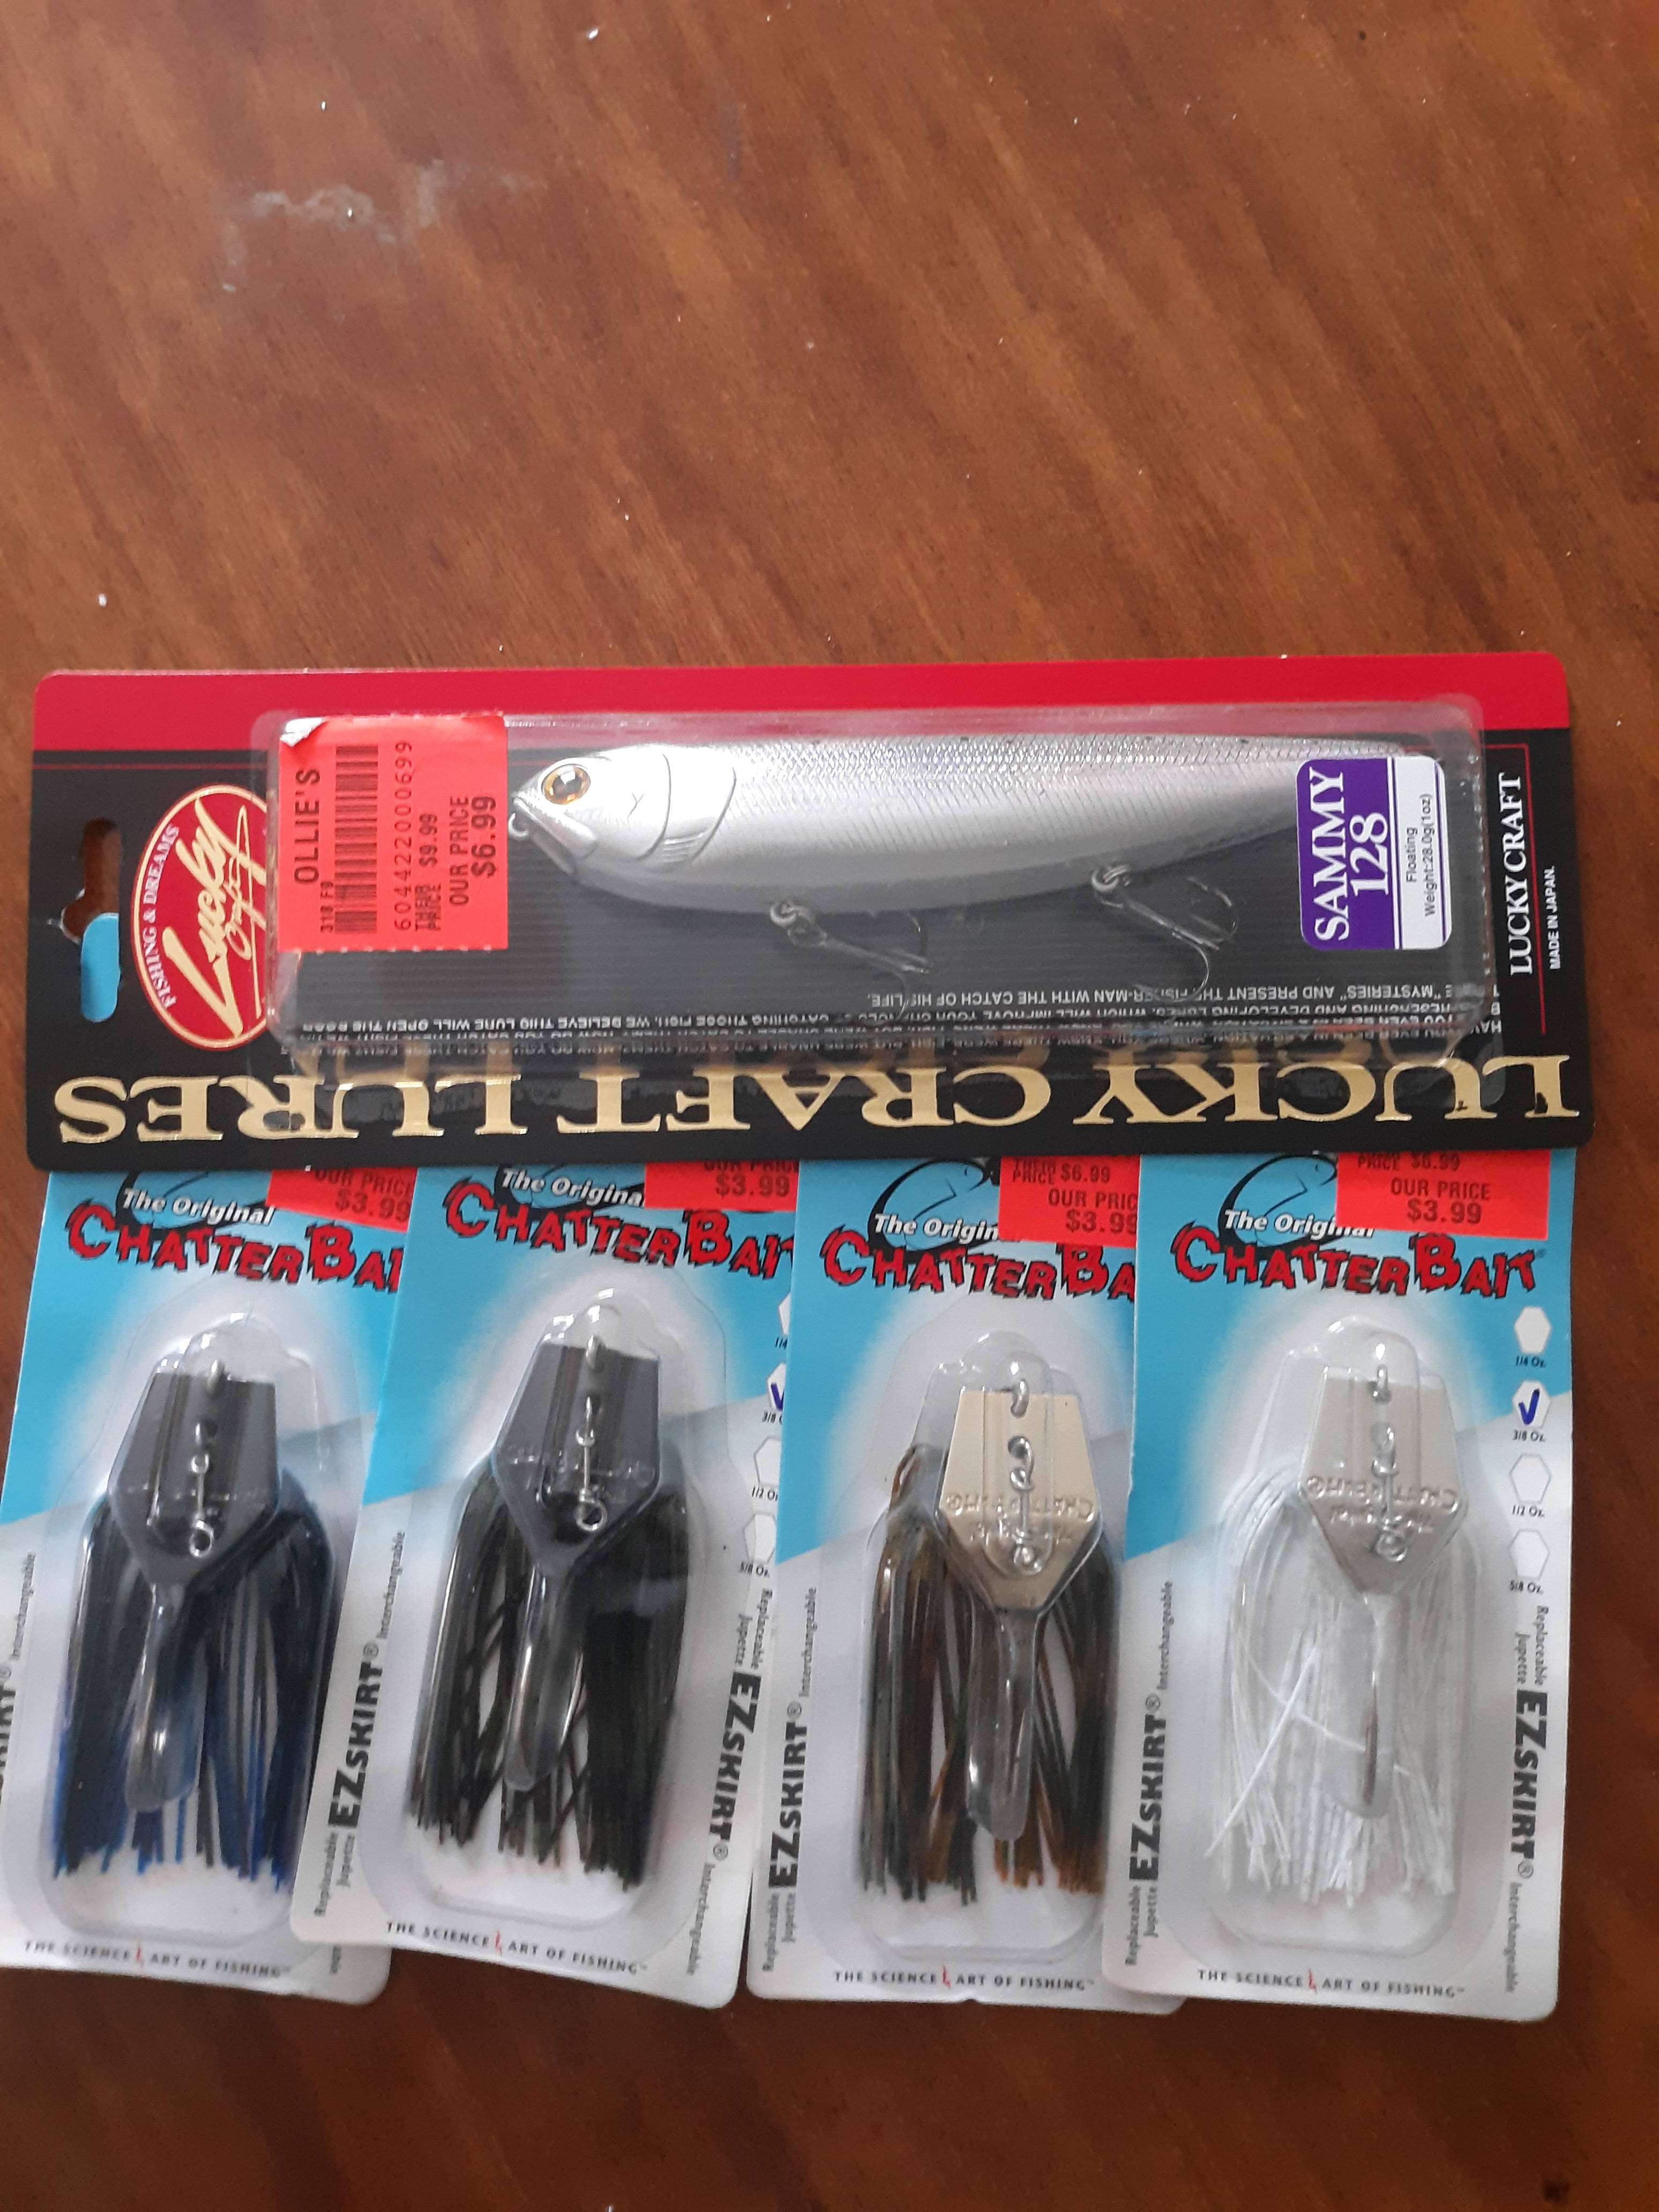 Good pick up at ollies for cheap : r/Fishing_Gear